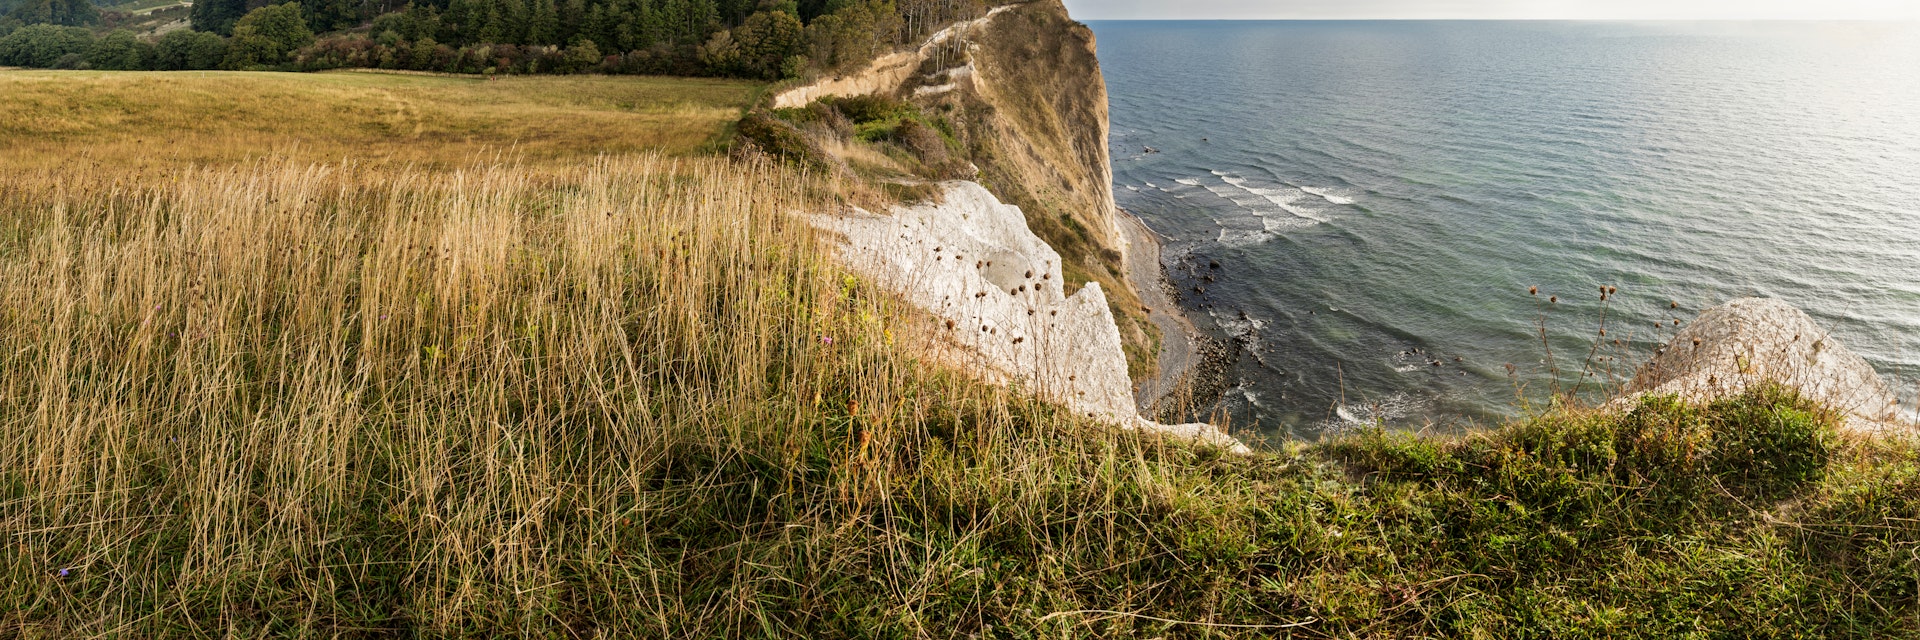 Panoramic shot made up of 4 vertical frames stitched together of the  landscape view of the famous chalk cliffs at Møns Klint on the island of Møn, Denmark. The cliffs run for 8 km along the coast ranging in height from a few meters above sea level to over 120m. The area is a popular destination for holiday makers looking for some adventure with lots of hiking trails, mountain bike tracks, sea kayaking and sport fishing activites all catered for. The tall slim tower almost hidden in the trees is a relic of the Cold War, it was an early warning radar station, that due to it's location in the Baltic  could "see" into Russian airspace, now it is used to monitor shipping.